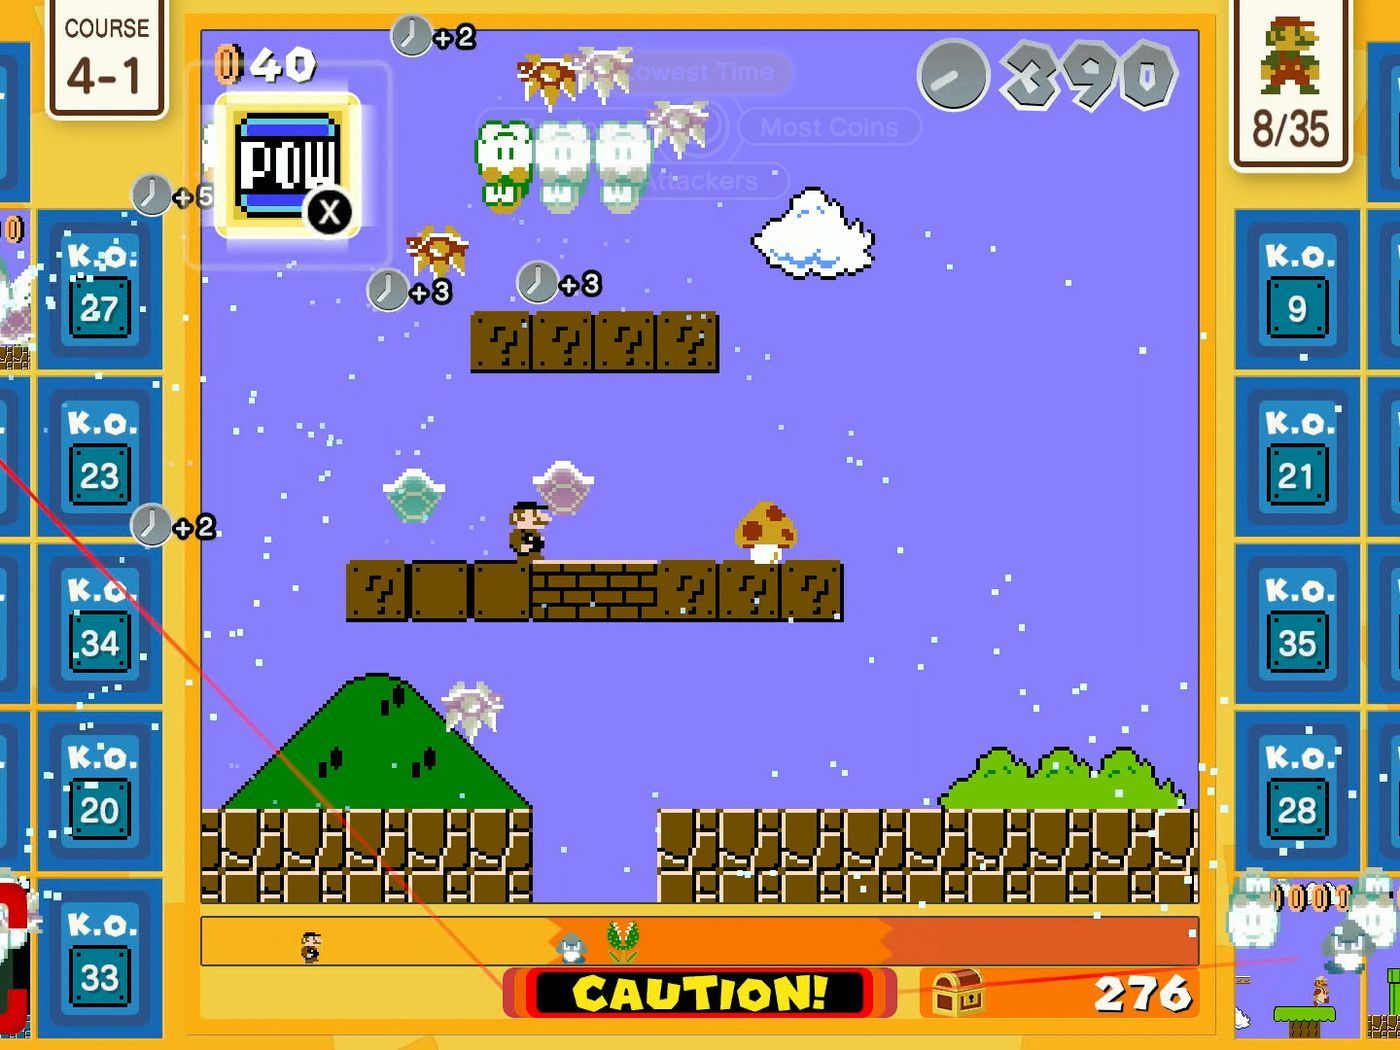 Super Mario Bros. 35 is a battle royale version of the original game